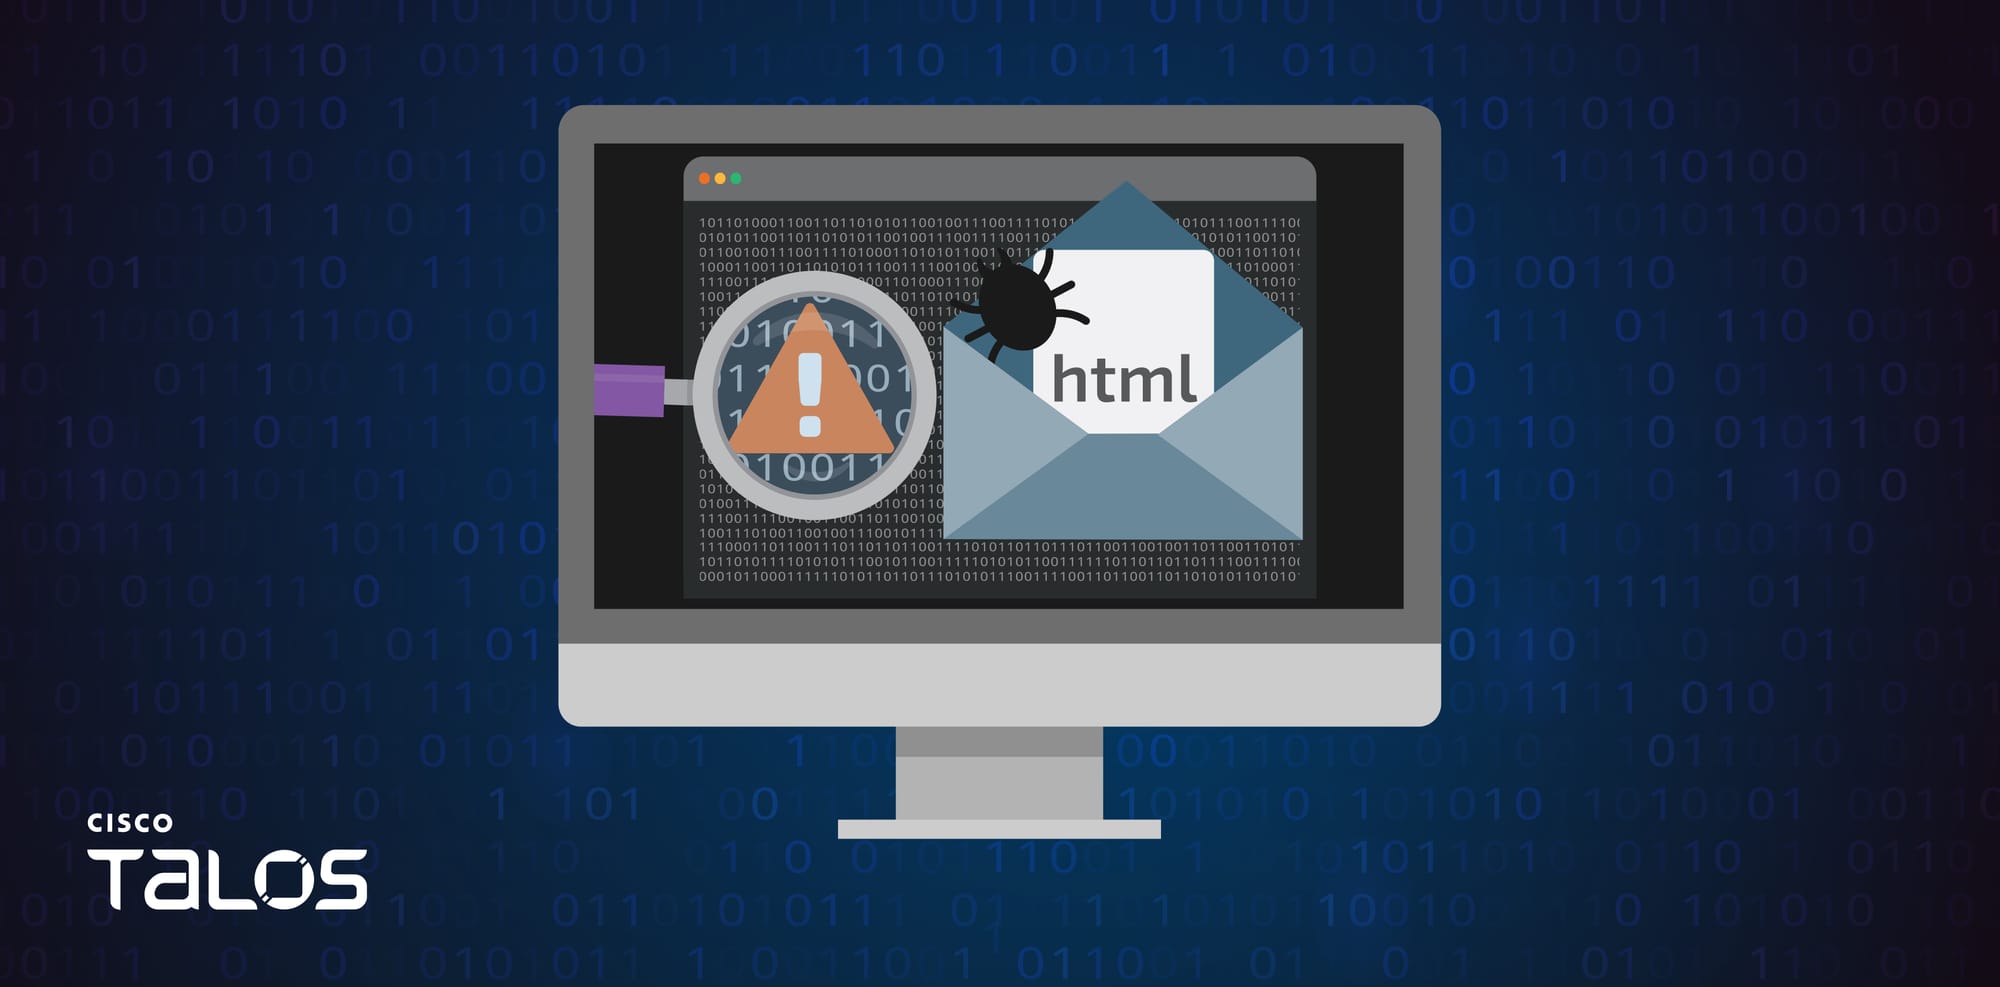 Hidden between the tags: Insights into spammers’ evasion techniques in HTML Smuggling